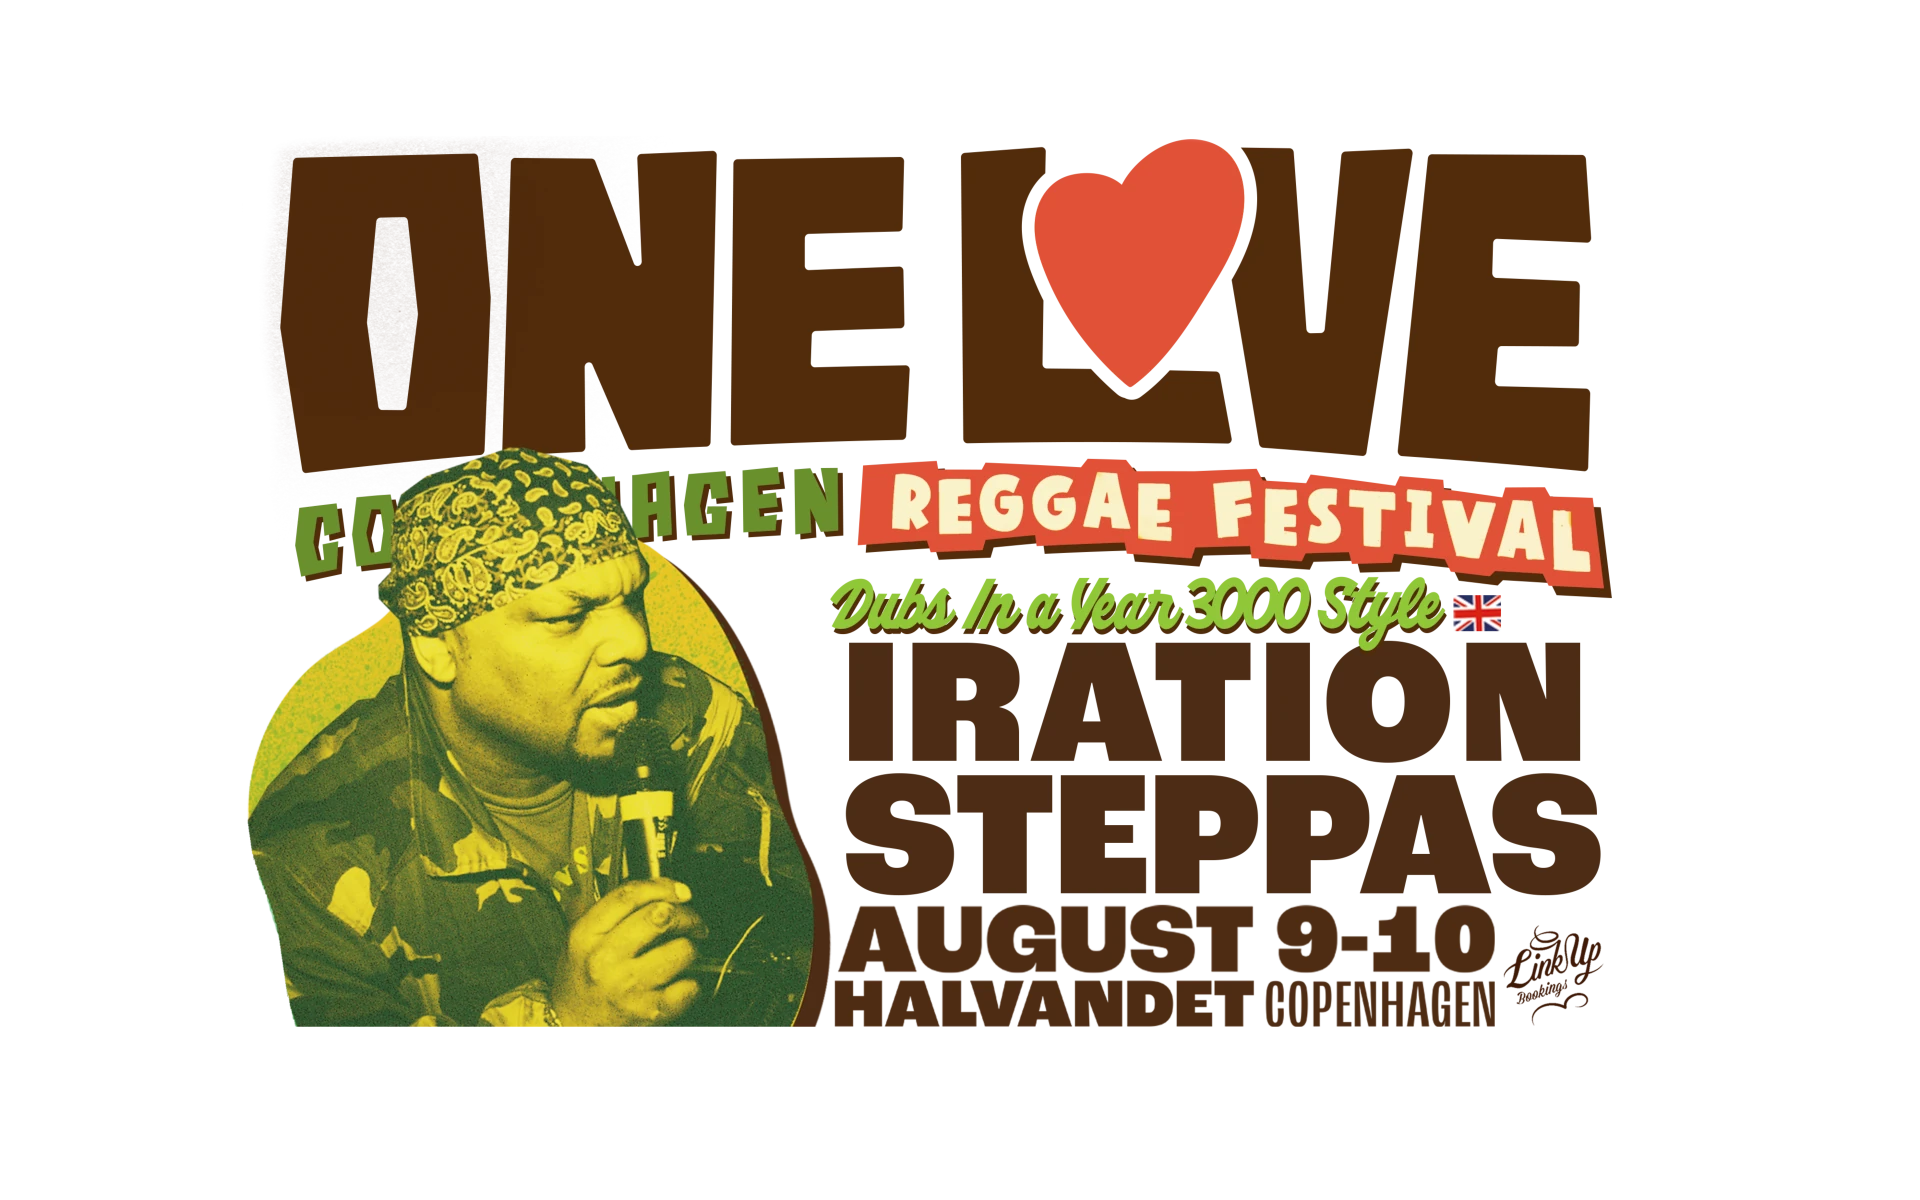 Iration Steppas performing at One Love Copenhagen 2024, a must-see act for reggae music lovers